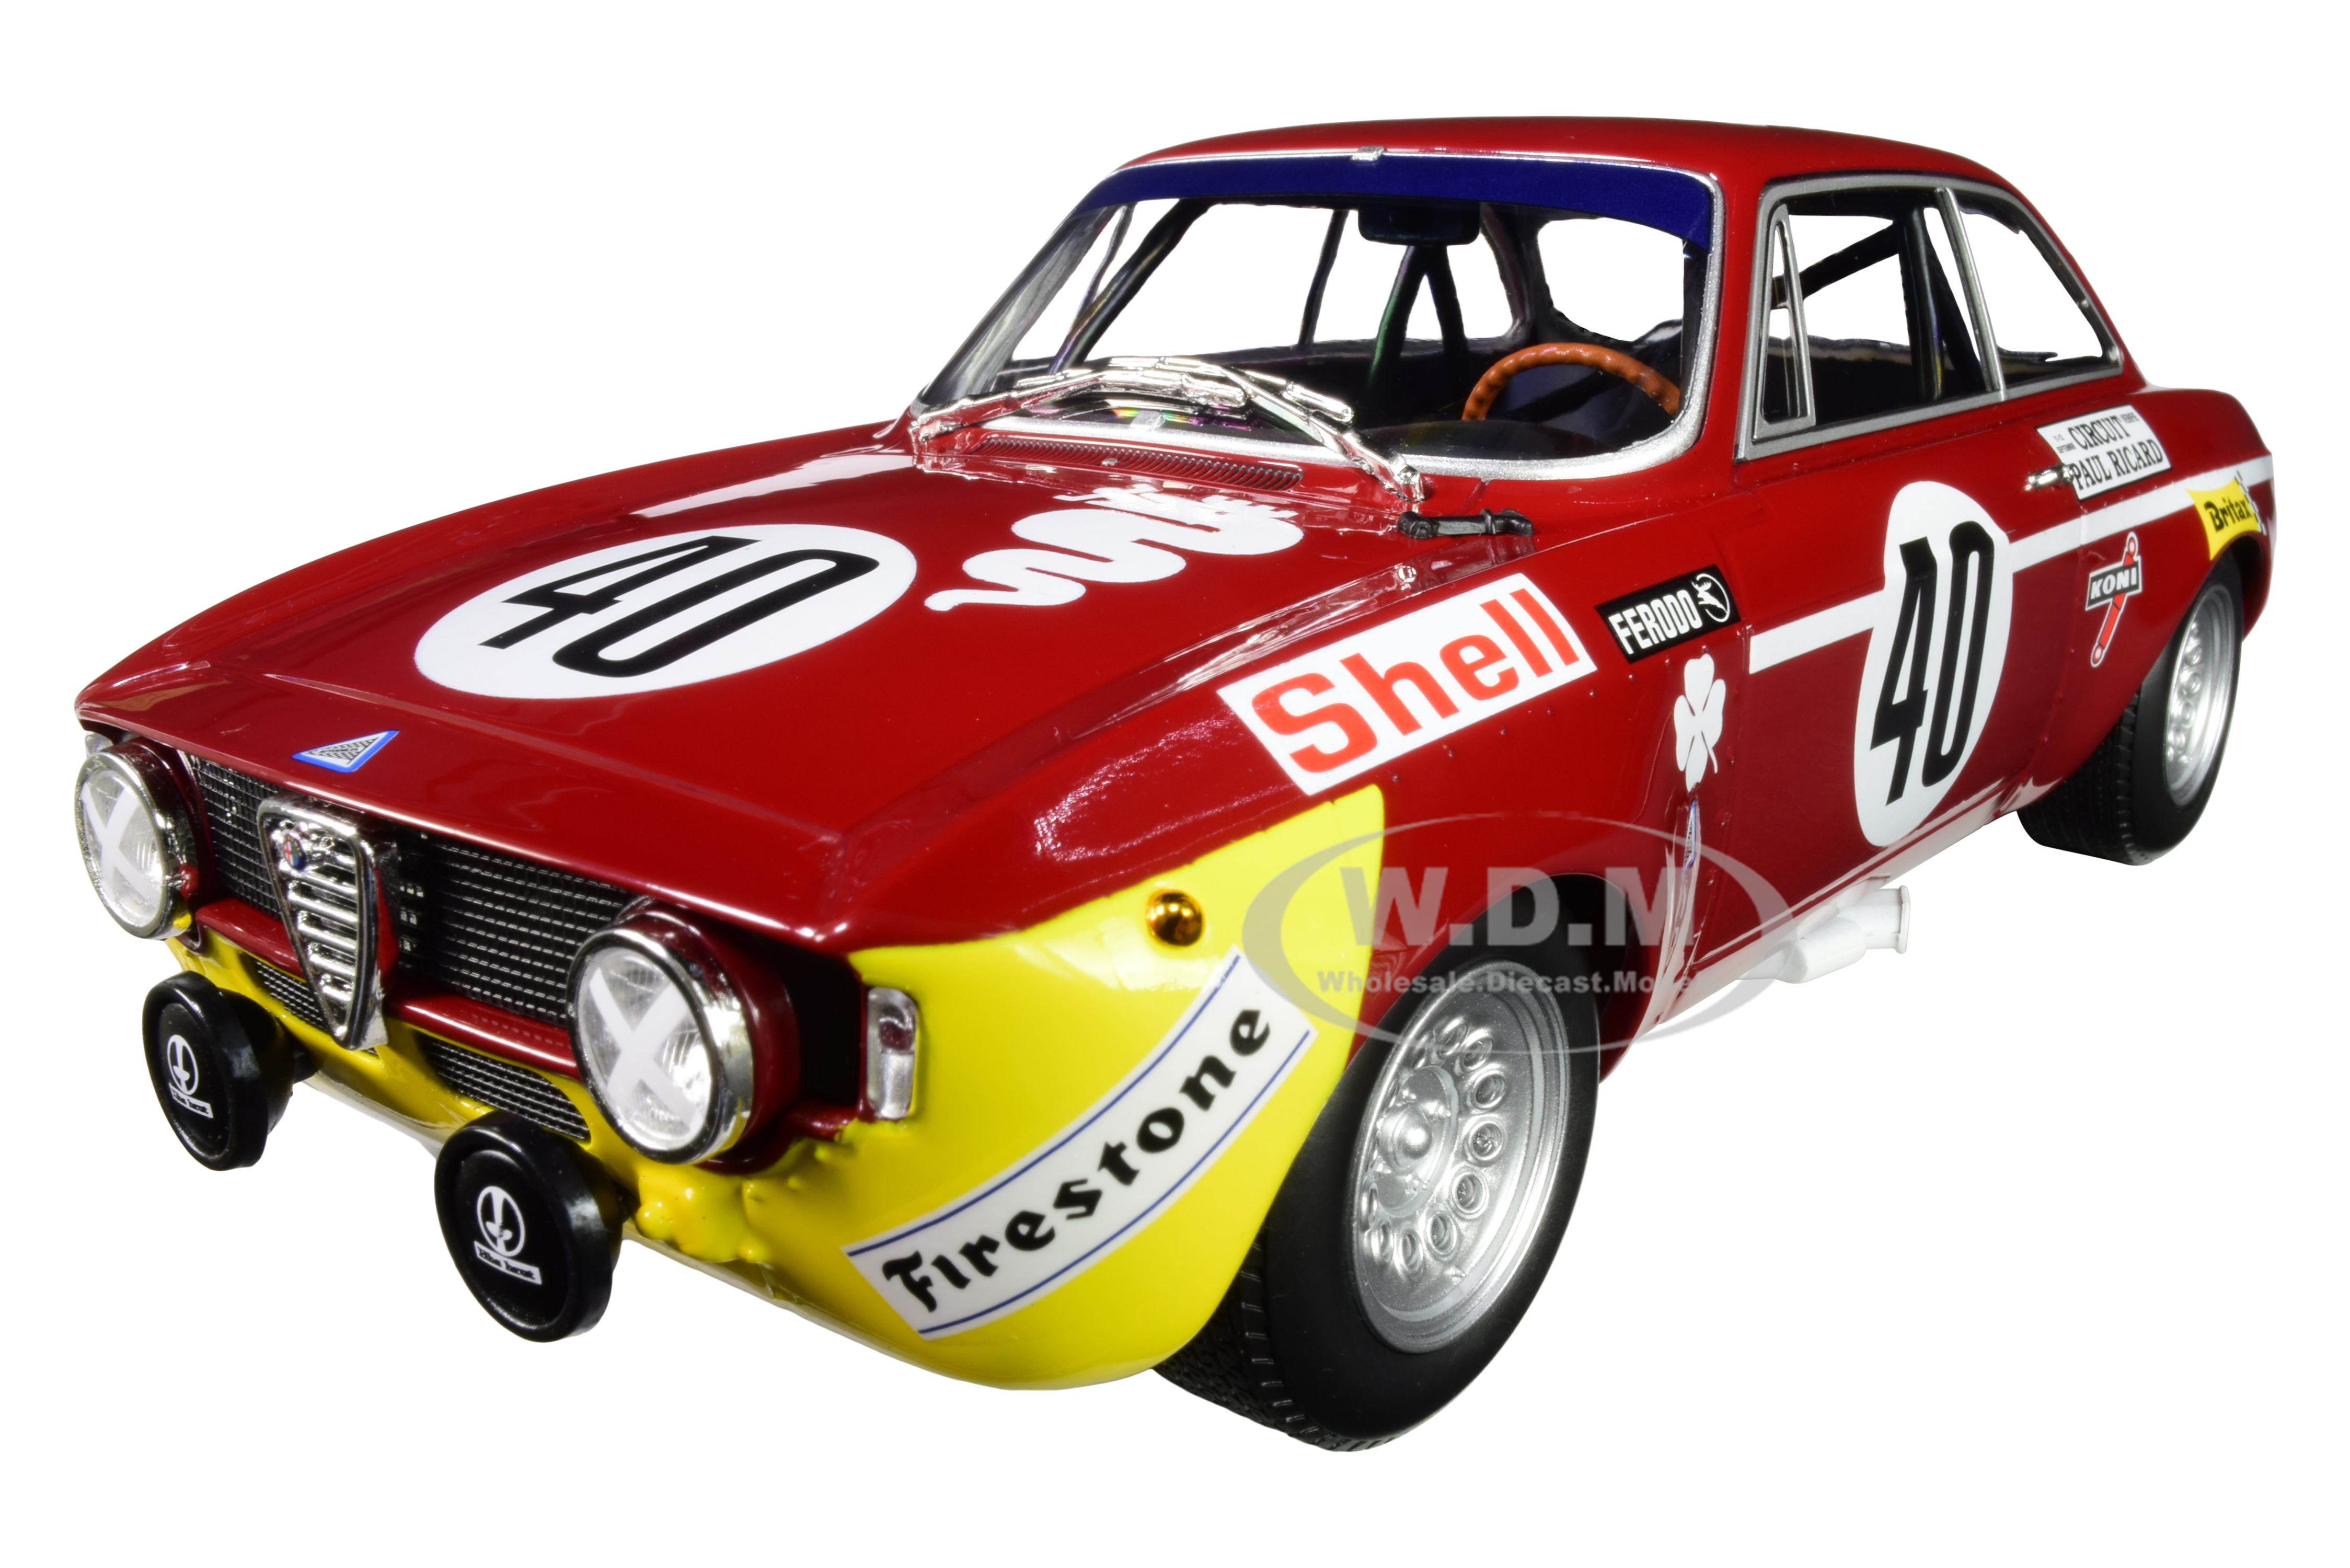 Alfa Romeo Gta 1300 Junior 40 Picchi / Chasseuil Winners Division 1 12h Paul Ricard (1971) Limited Edition To 336 Pieces Worldwide 1/18 Diecast Model